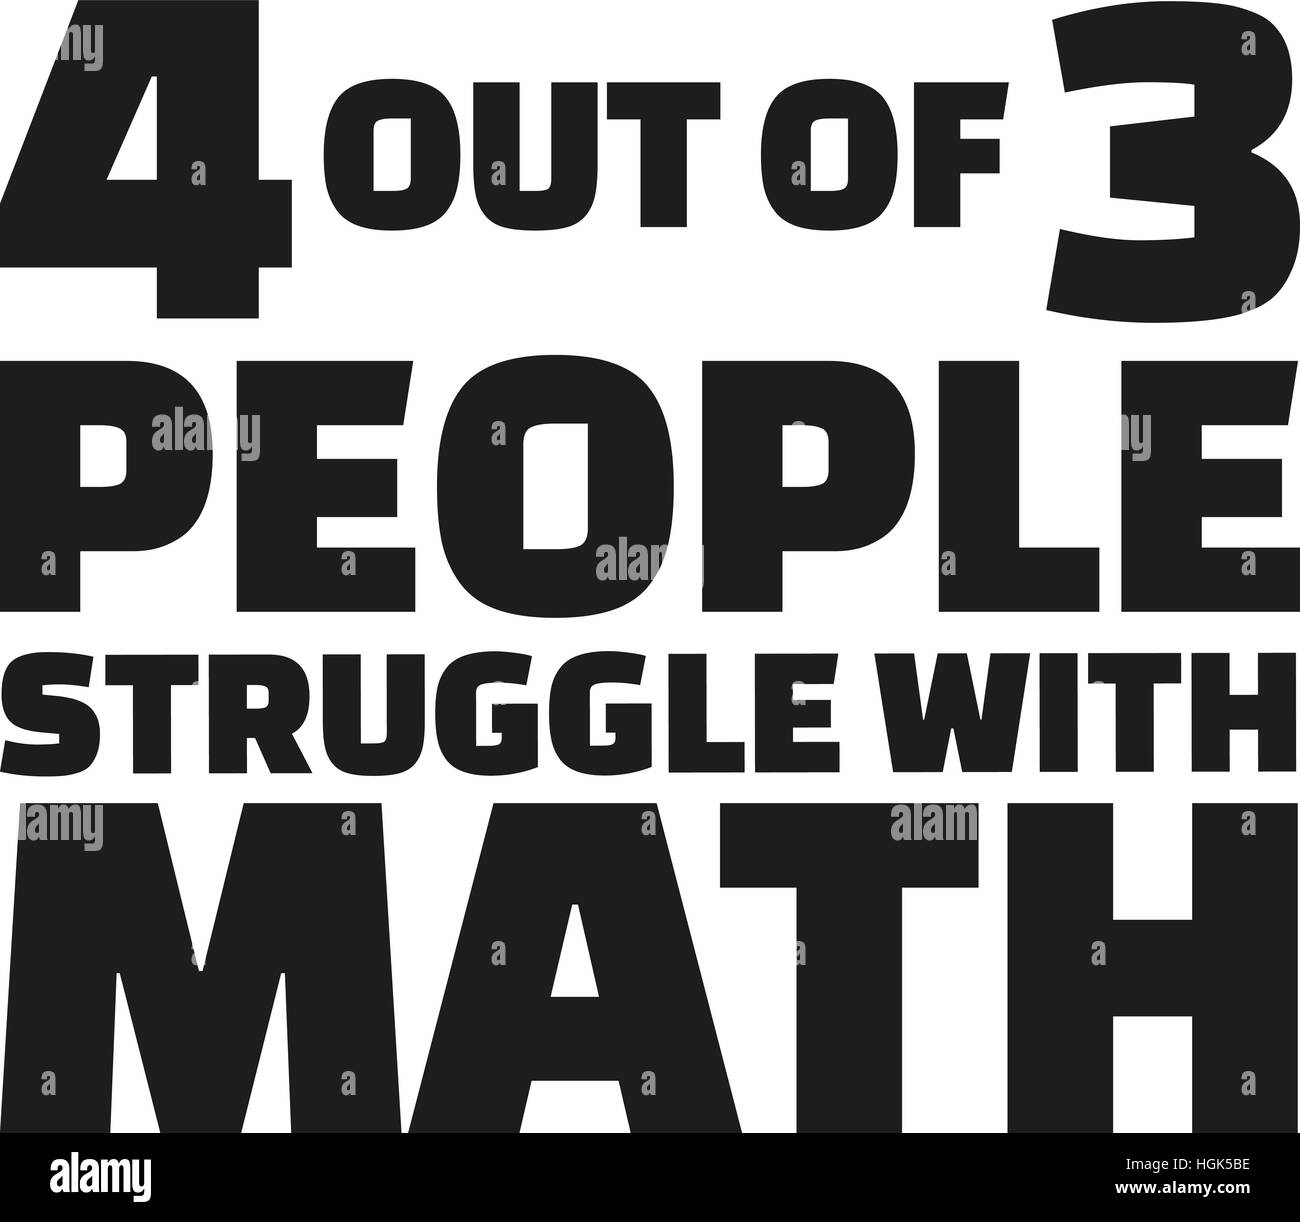 Four out of three people struggle with math. Quote. Stock Photo